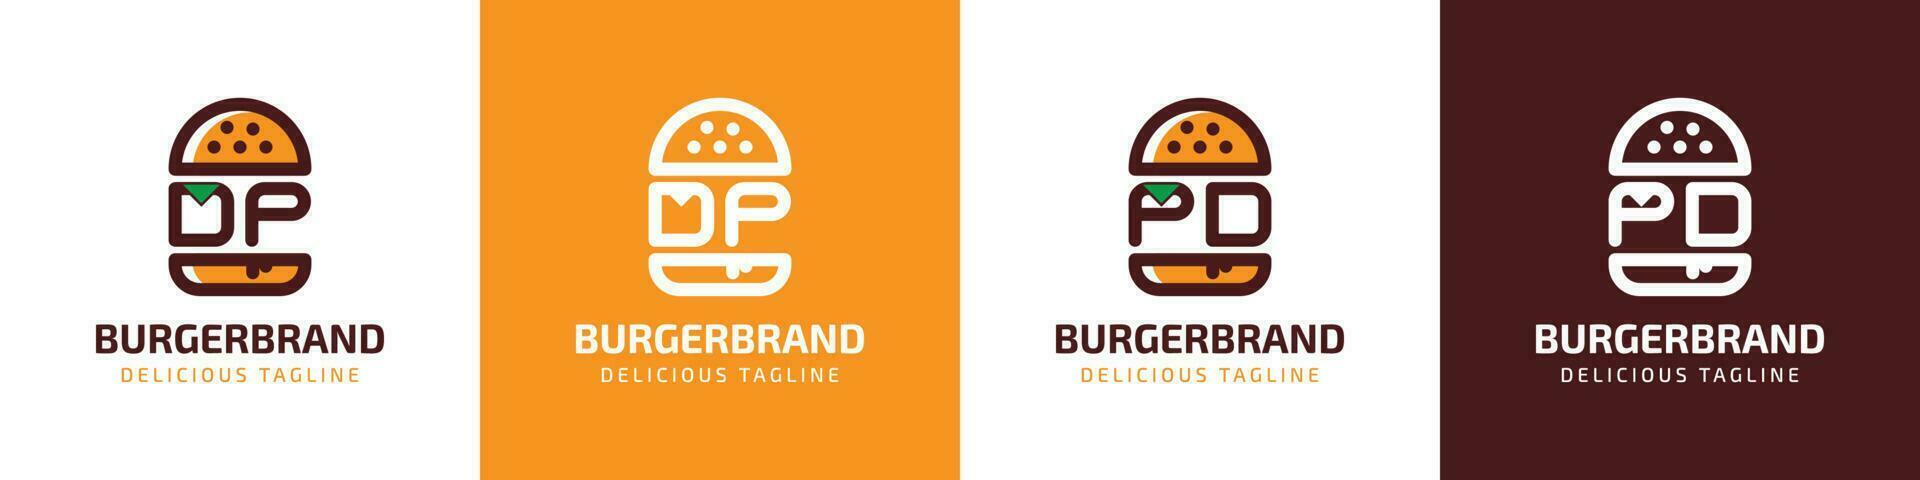 Letter DP and PD Burger Logo, suitable for any business related to burger with DP or PD initials. vector